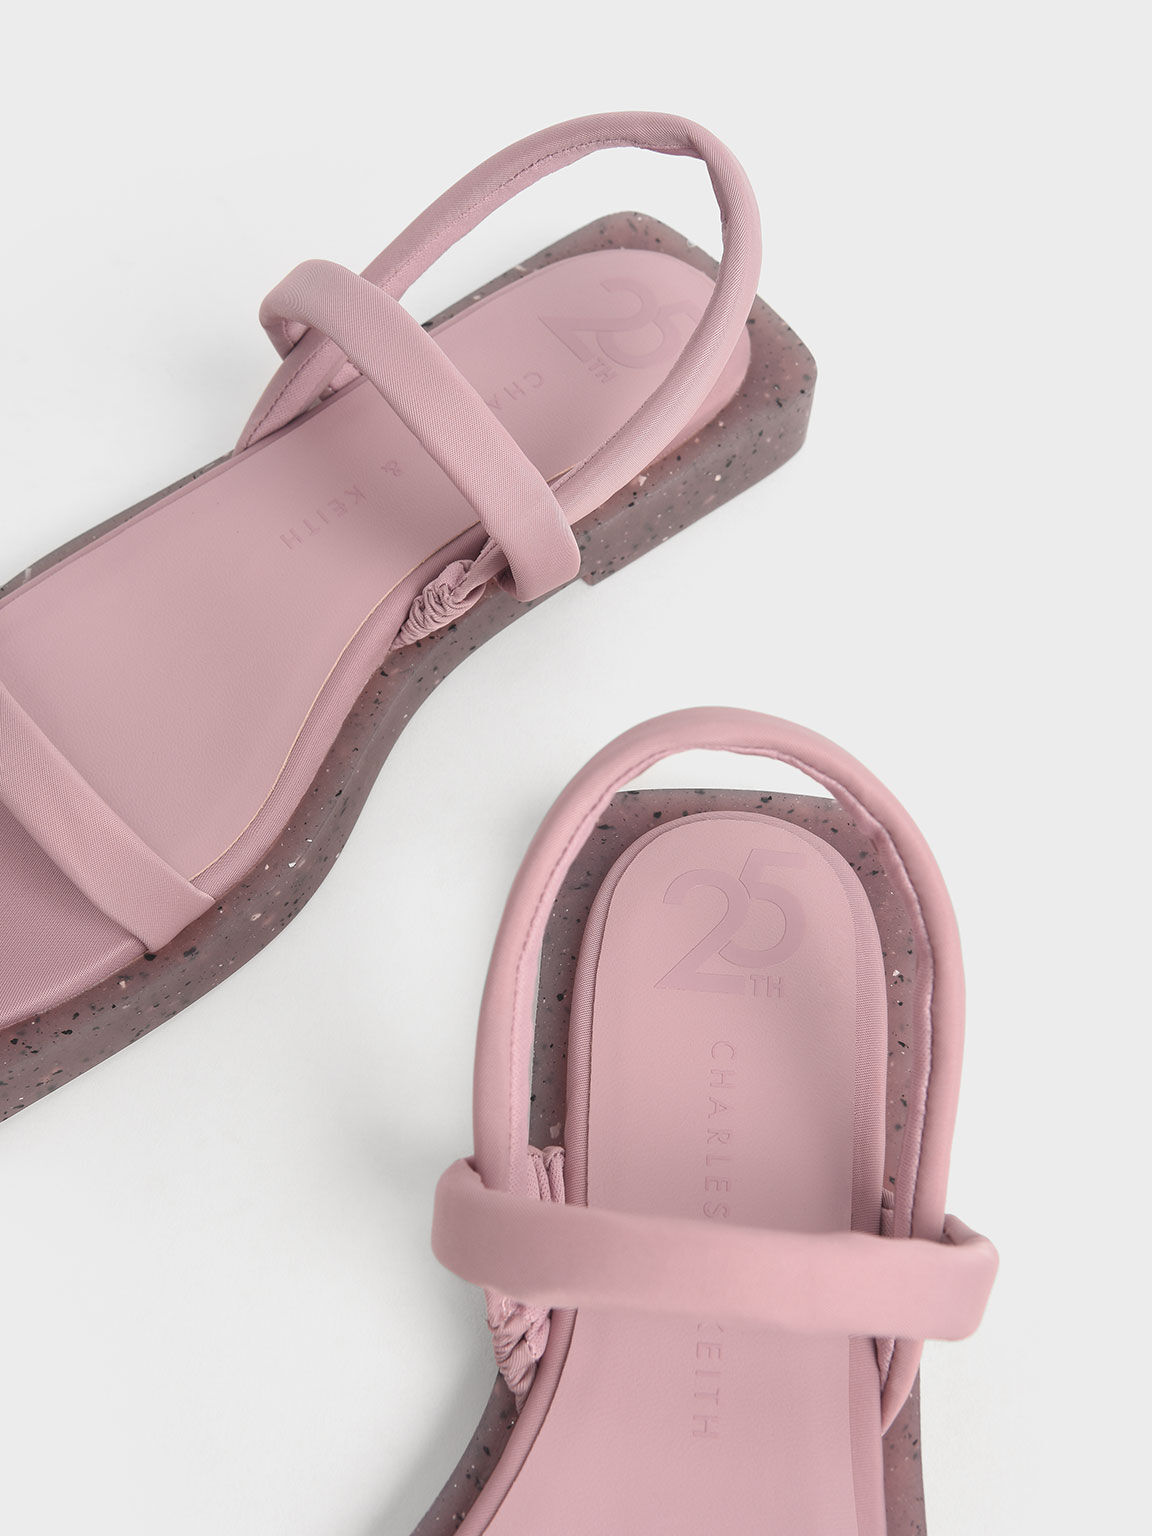 The Anniversary Series: Arabella Recycled Nylon Slingback Sandals, Pink, hi-res